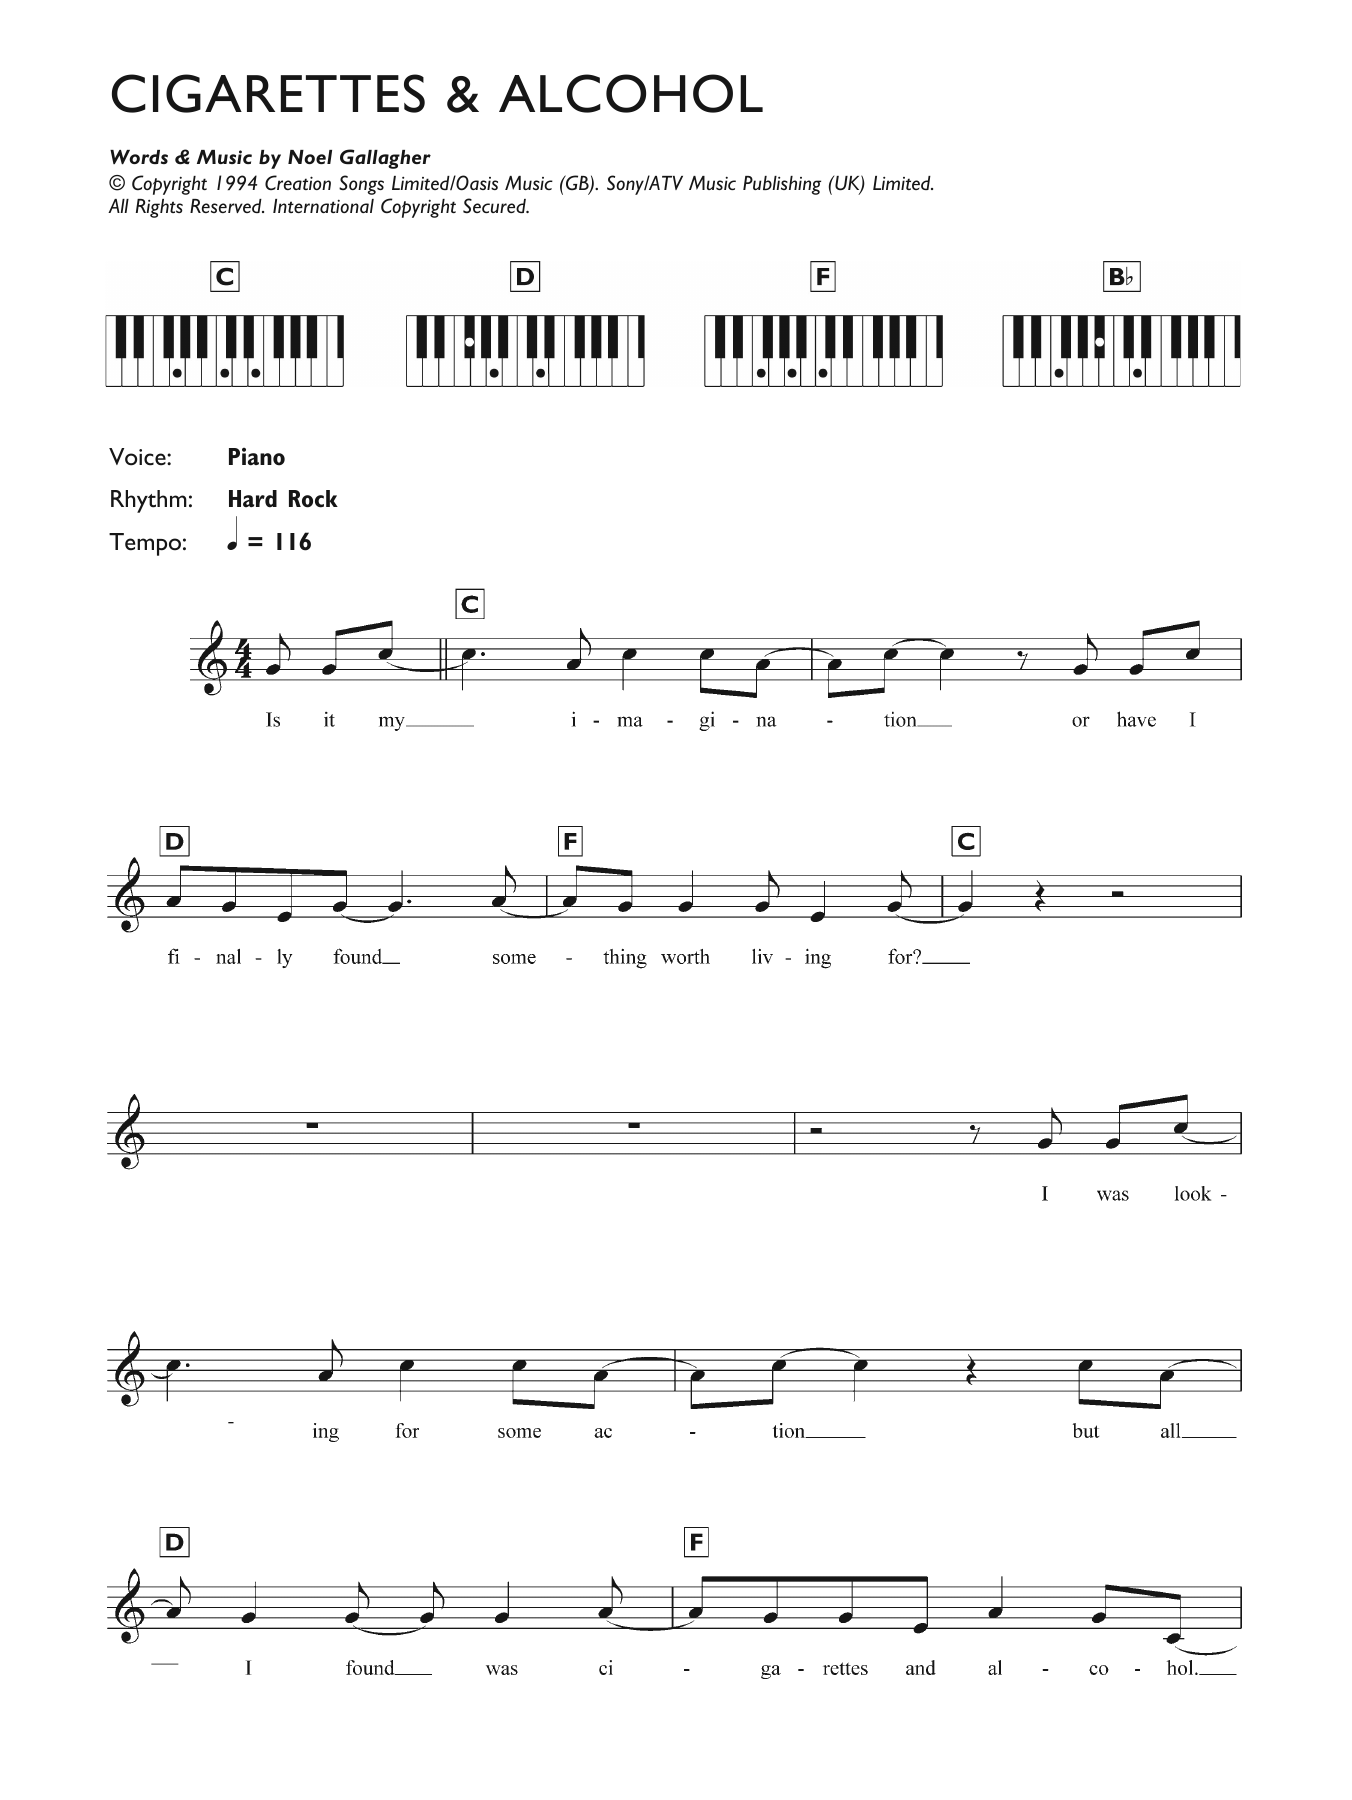 Download Oasis Cigarettes and Alcohol Sheet Music